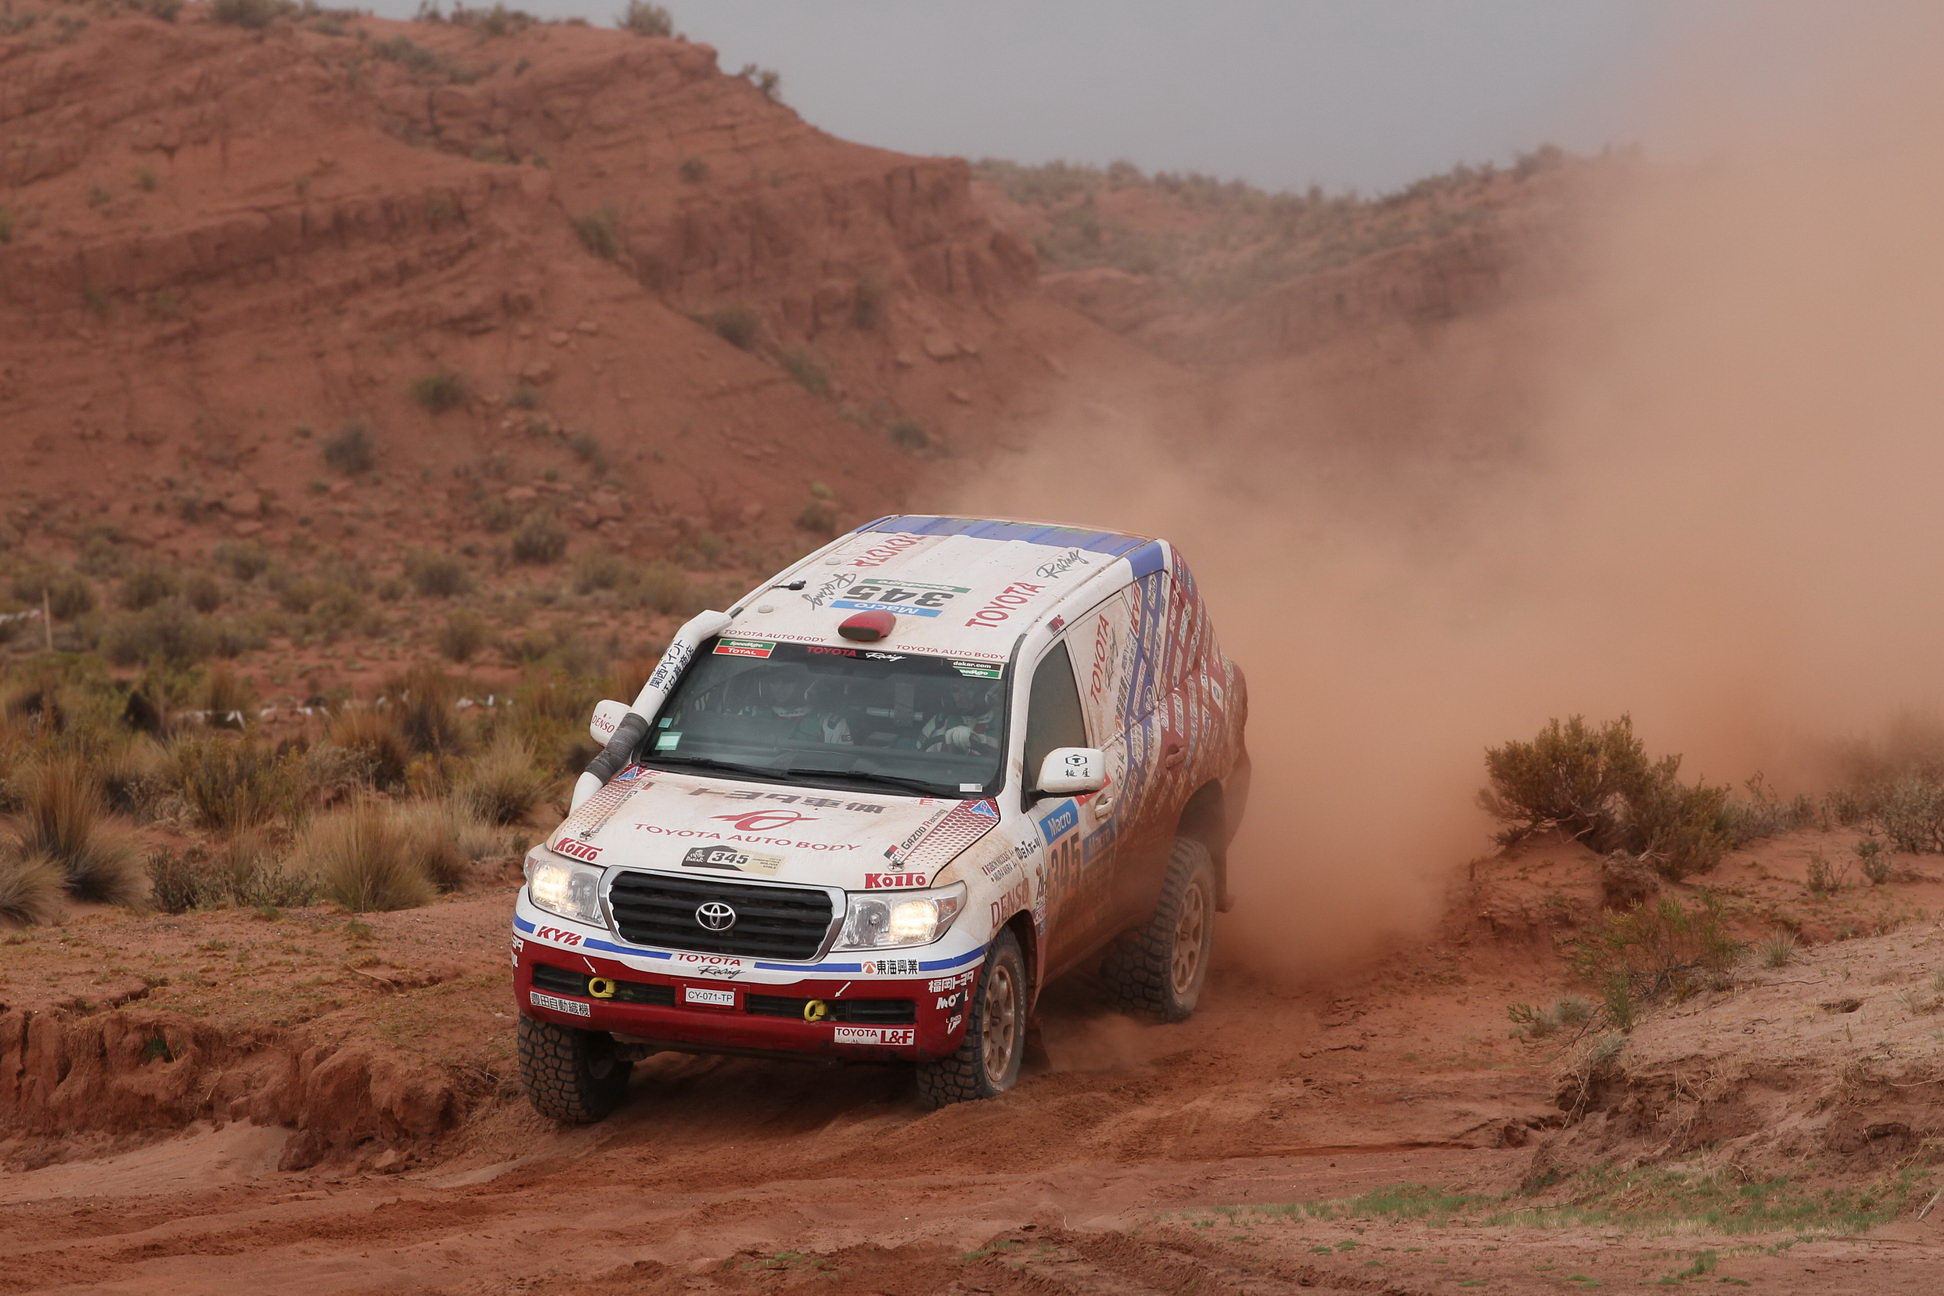 Team Land Cruiser in the Production Category held onto 1st and 2nd at the finish line